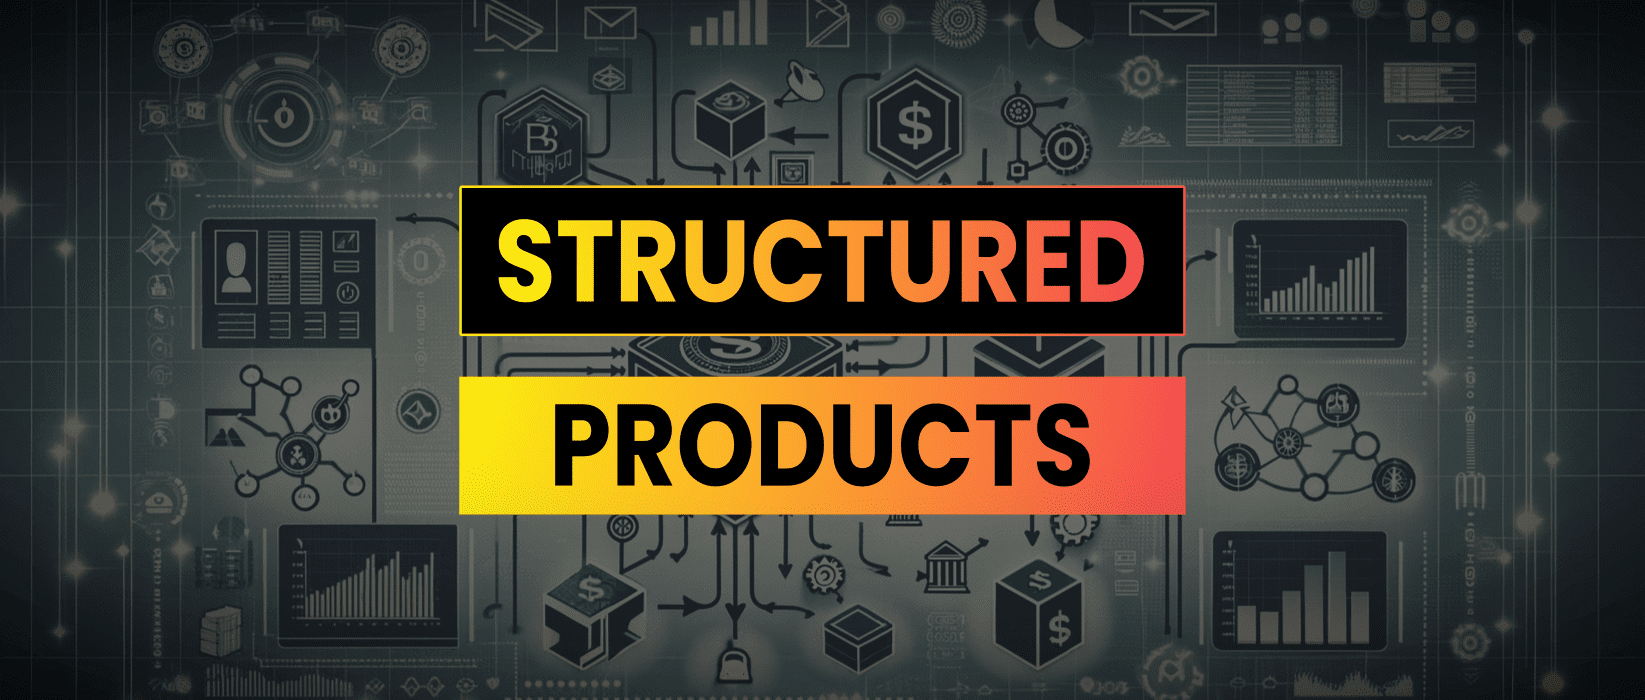 Structured Products DeFi